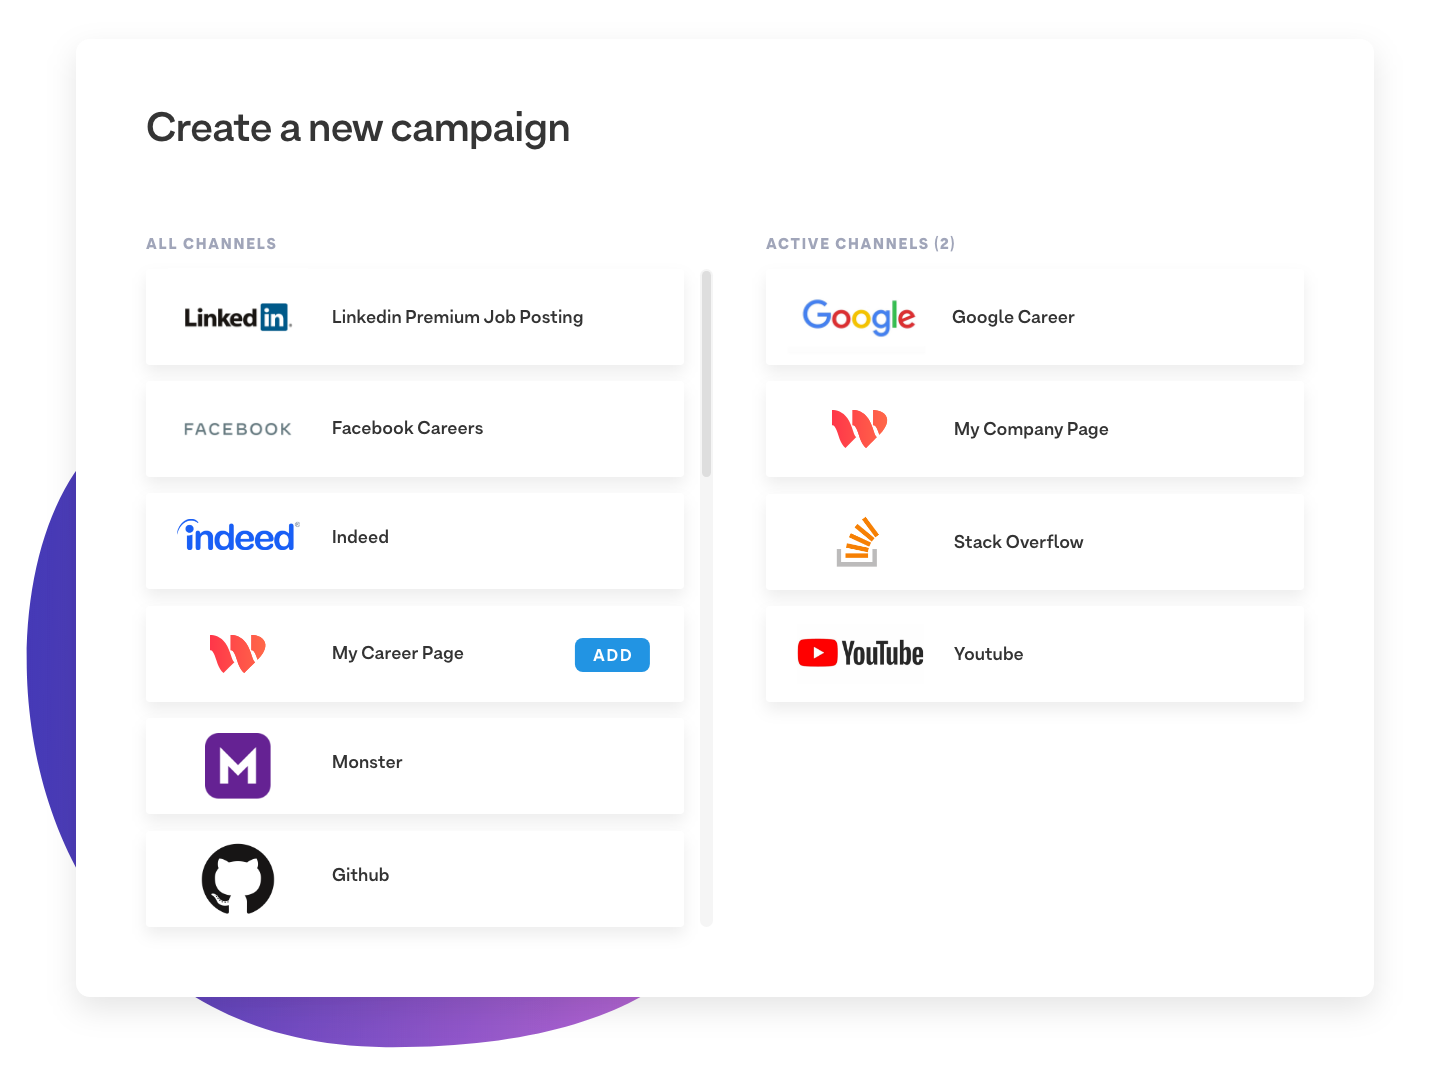 Channels for new campaigns